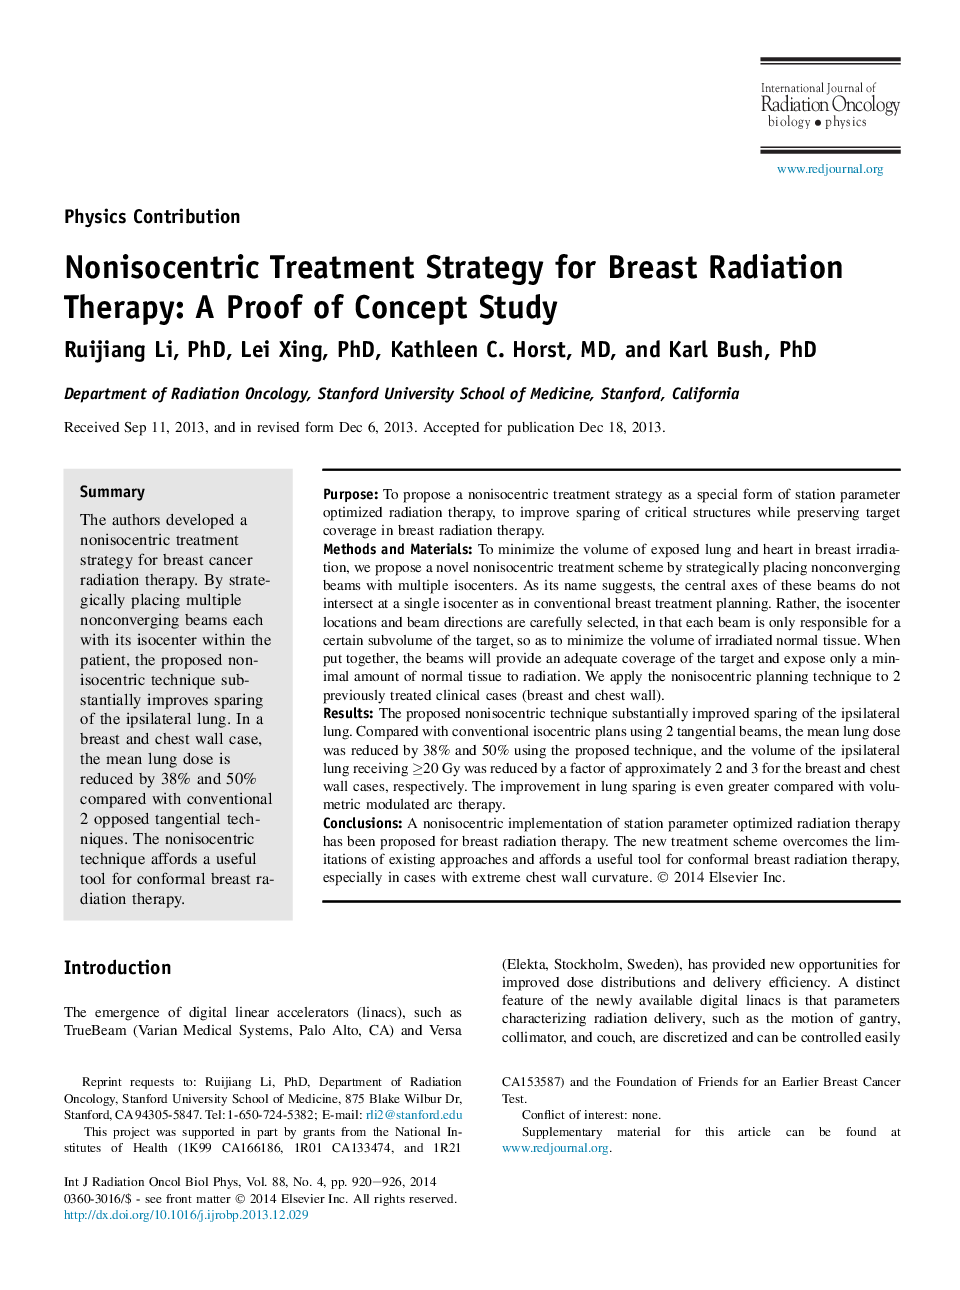 Nonisocentric Treatment Strategy for Breast Radiation Therapy: A Proof of Concept Study